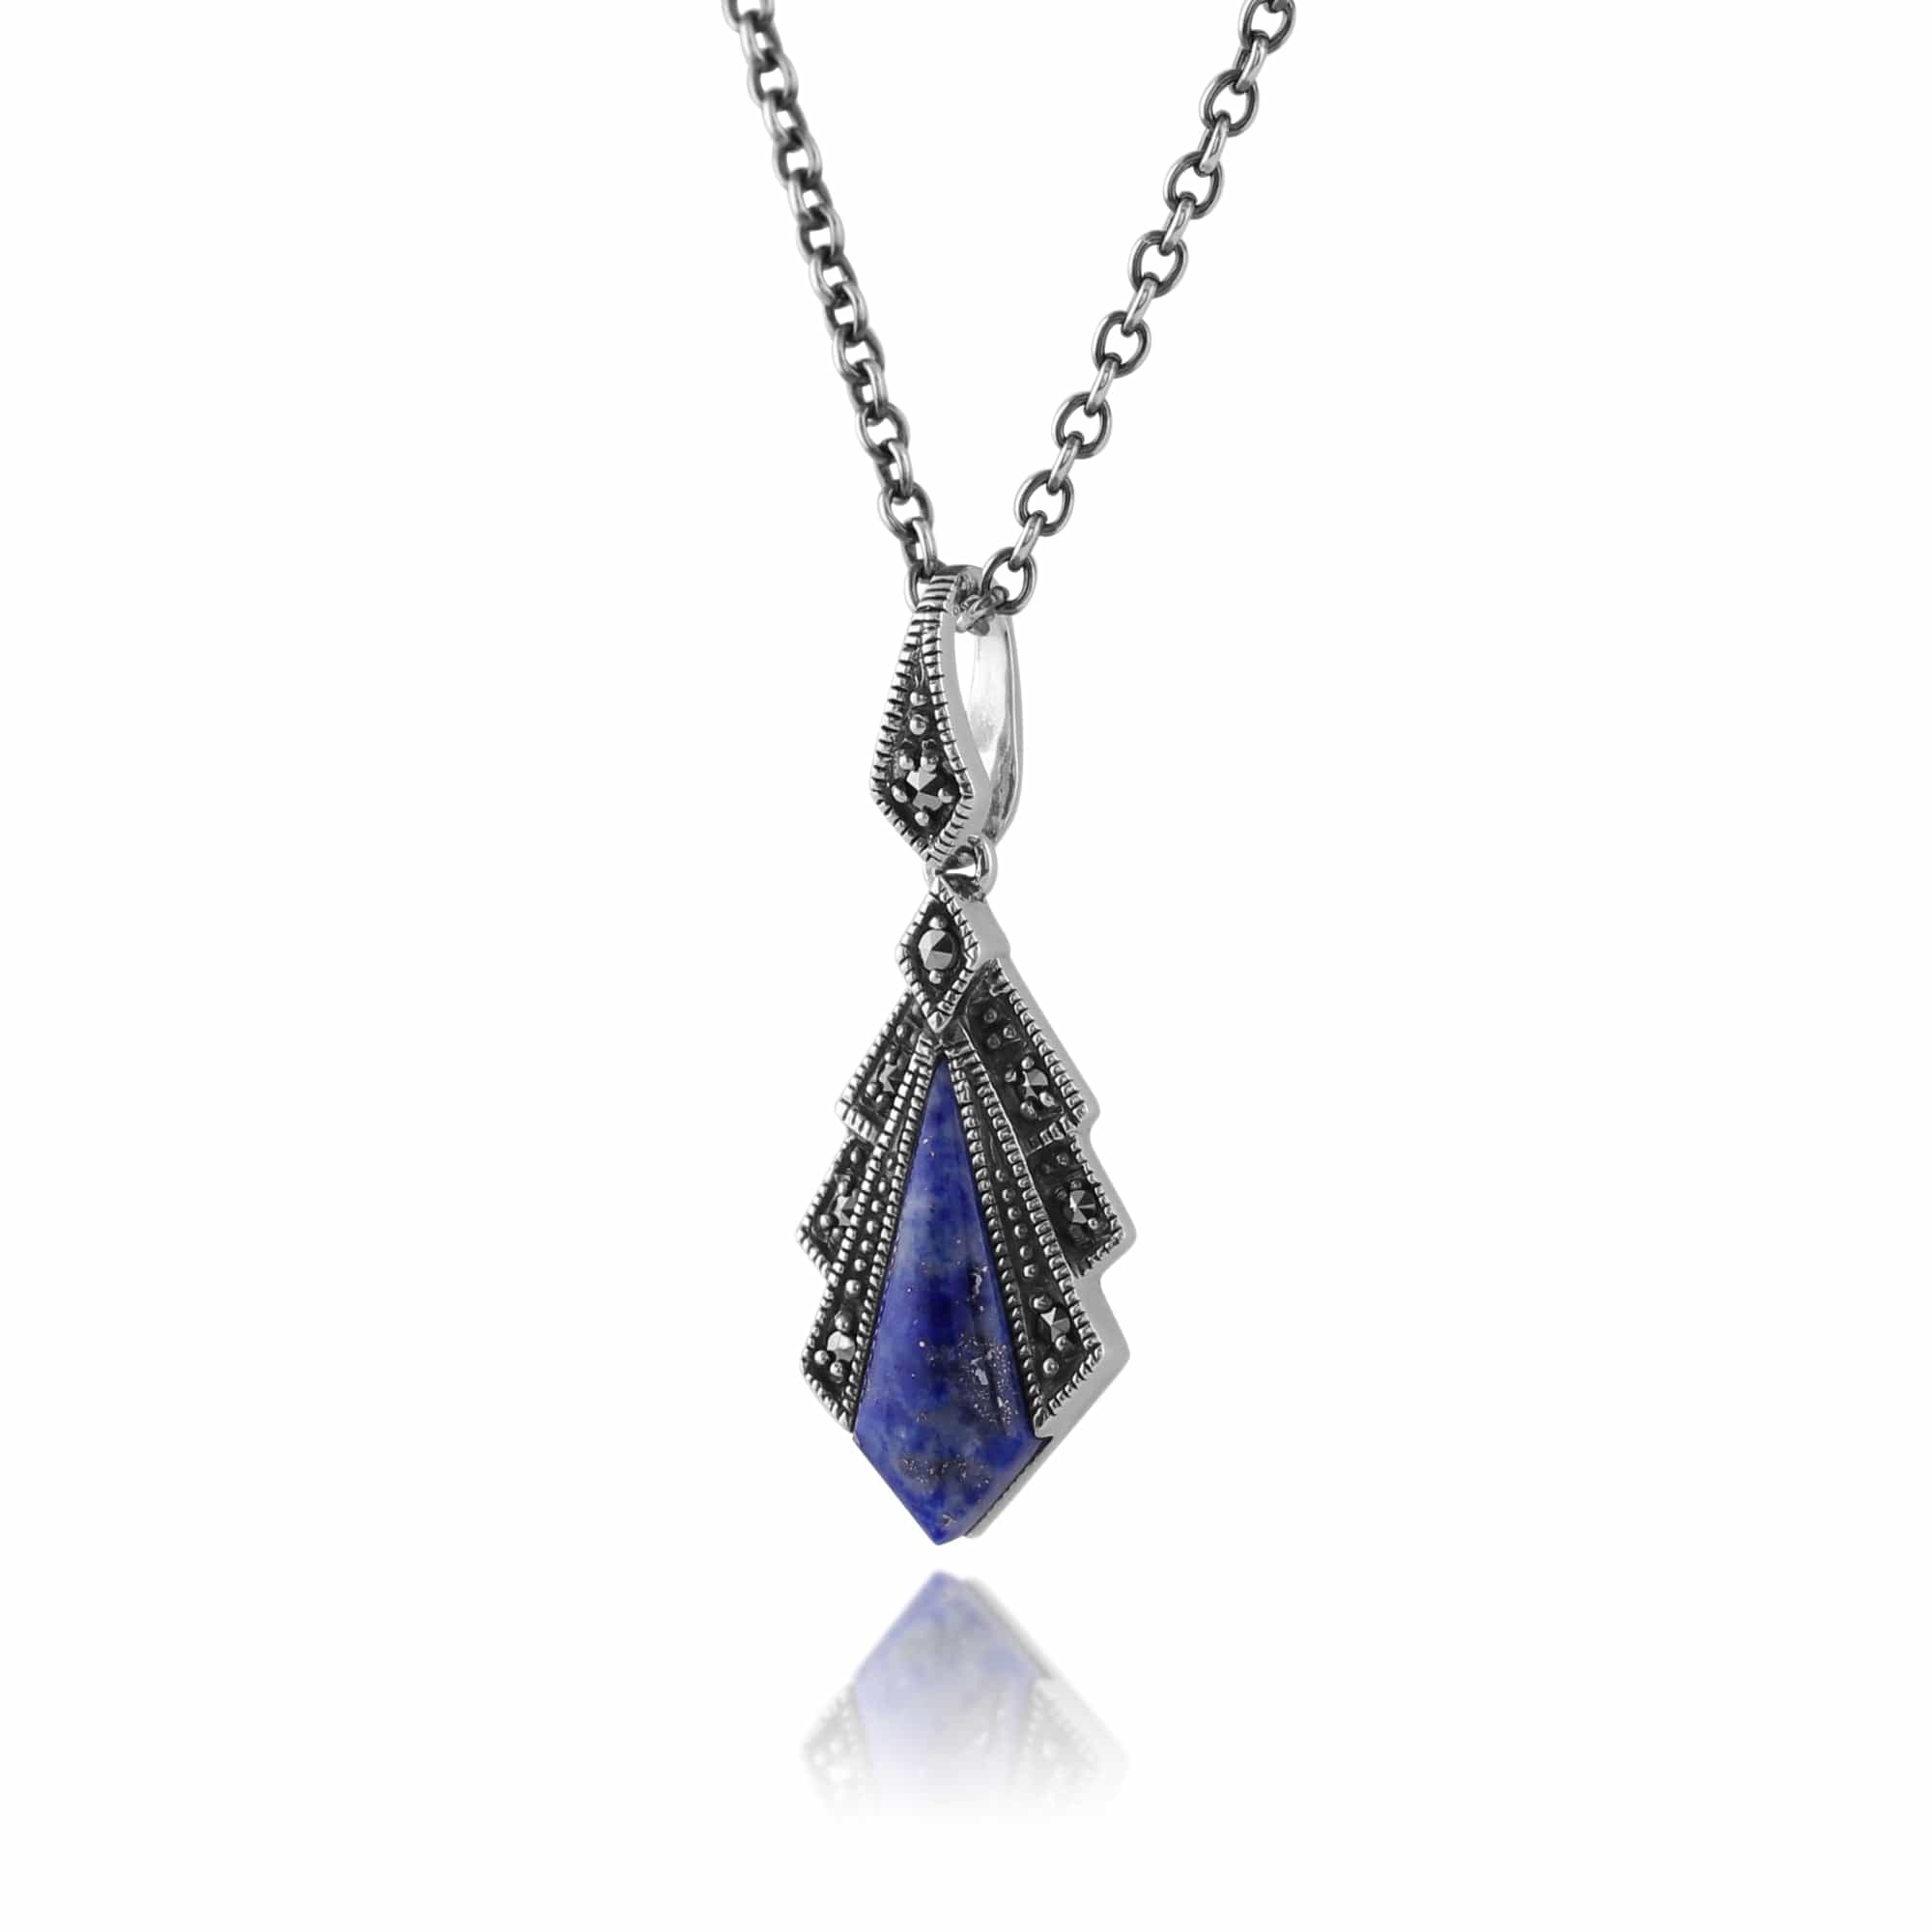 214N658202925 Art Deco Style Lapis Lazuli & Marcasite Pendant in 925 Sterling Silver 3